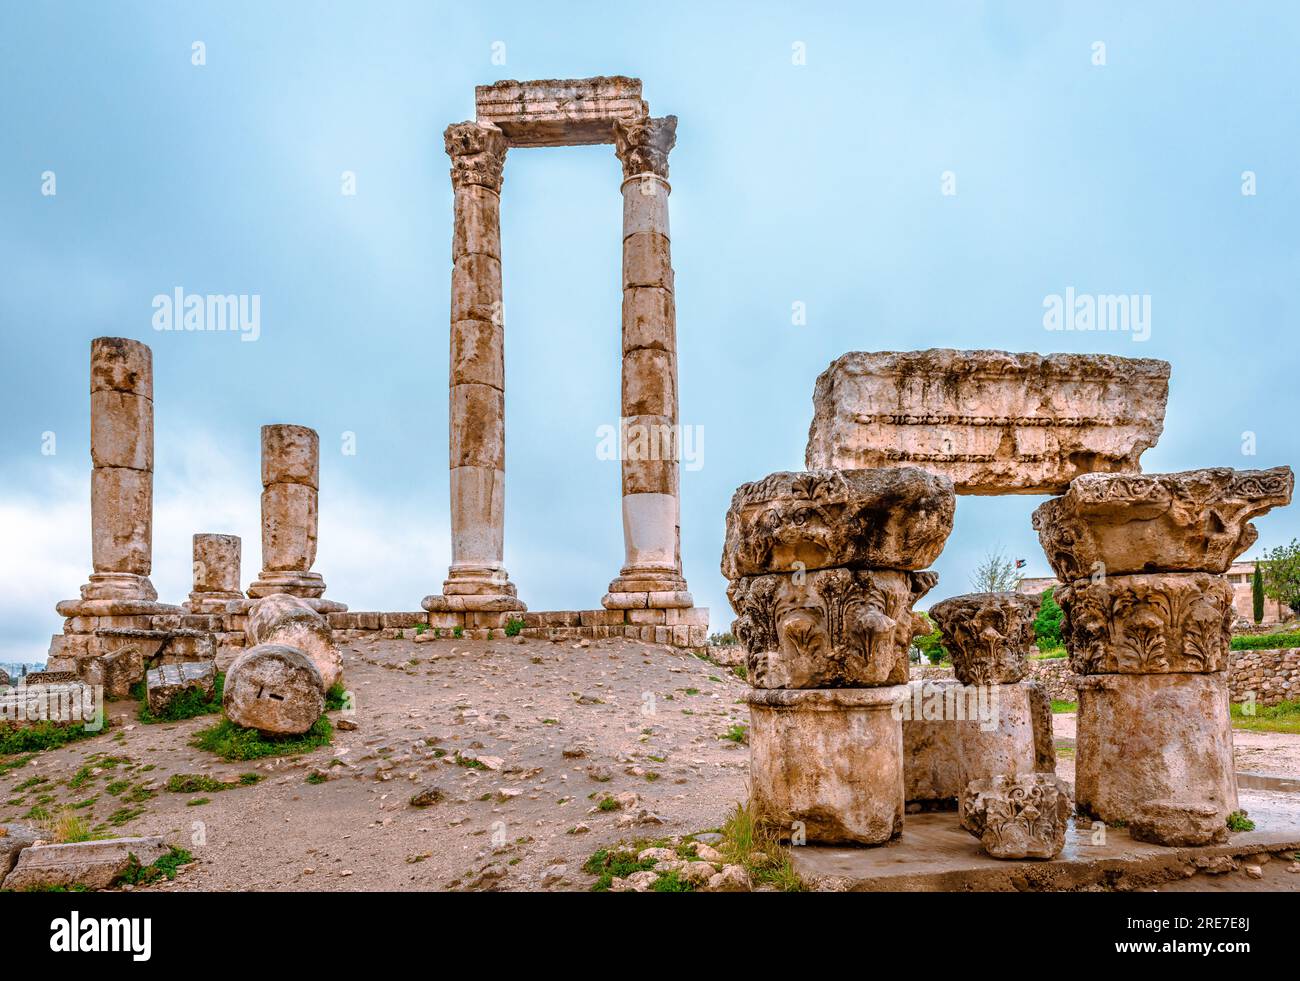 The ruins of the Temple of Hercules. This temple is the most significant Roman structure in the Amman Citadel. Stock Photo